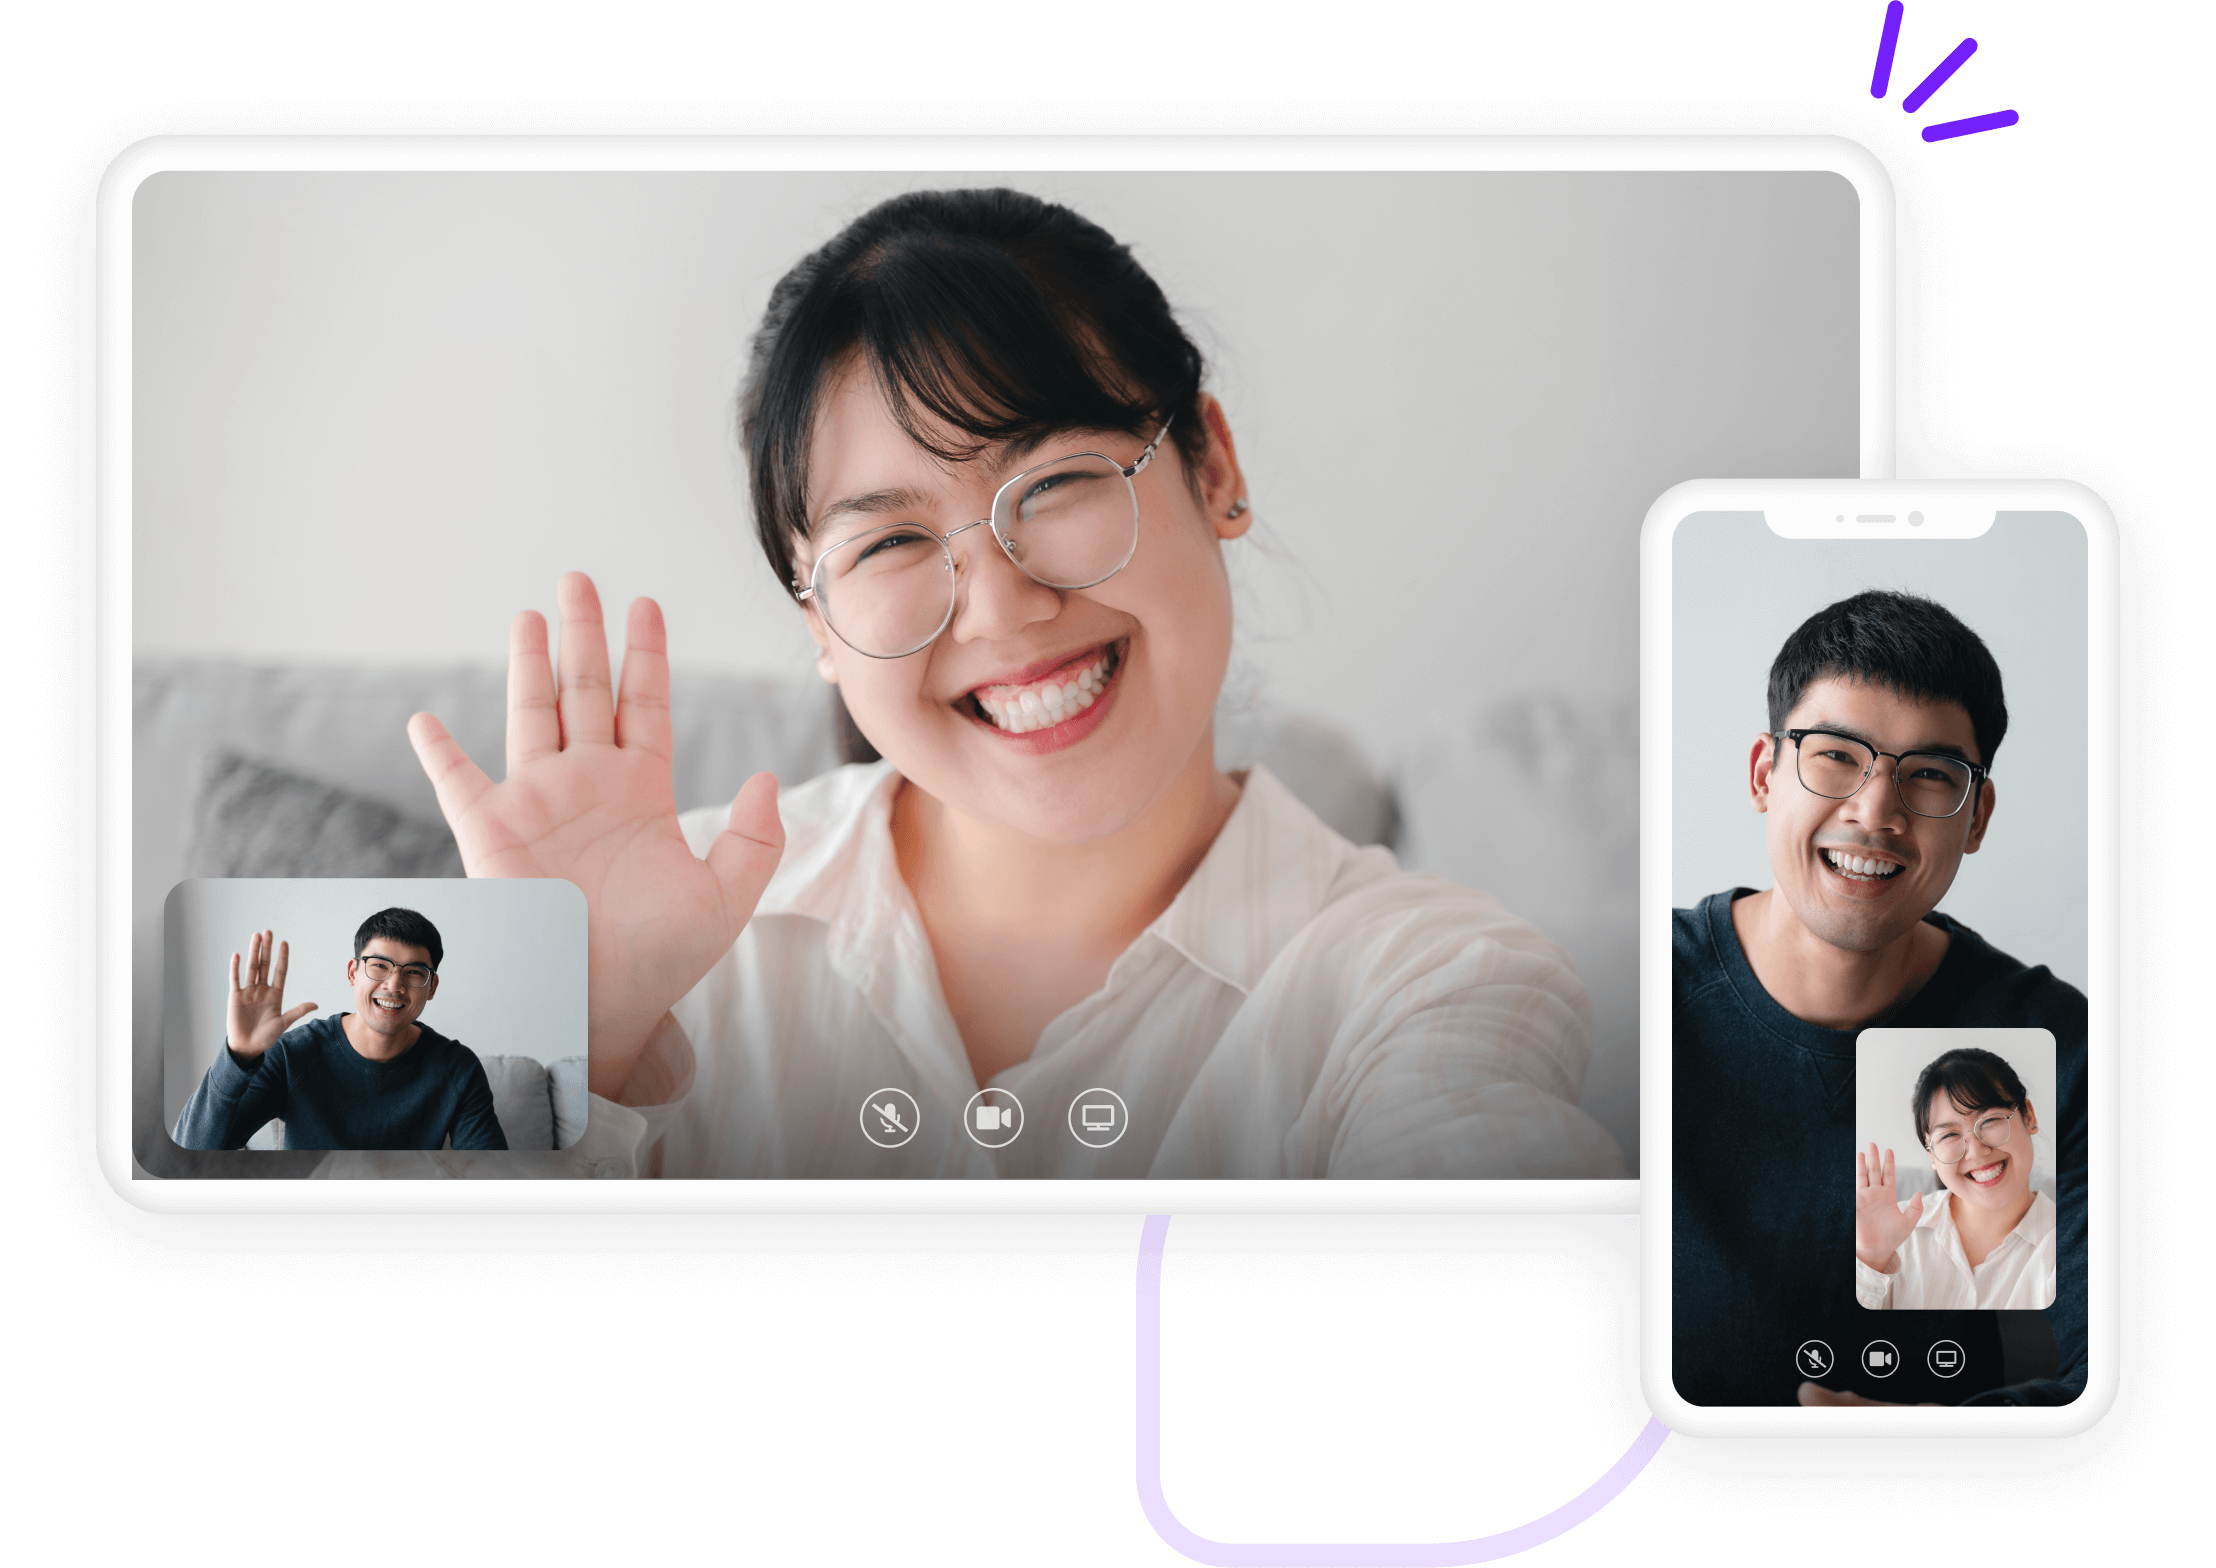 Man and woman on a video call with each other, waving at the camera and smiling